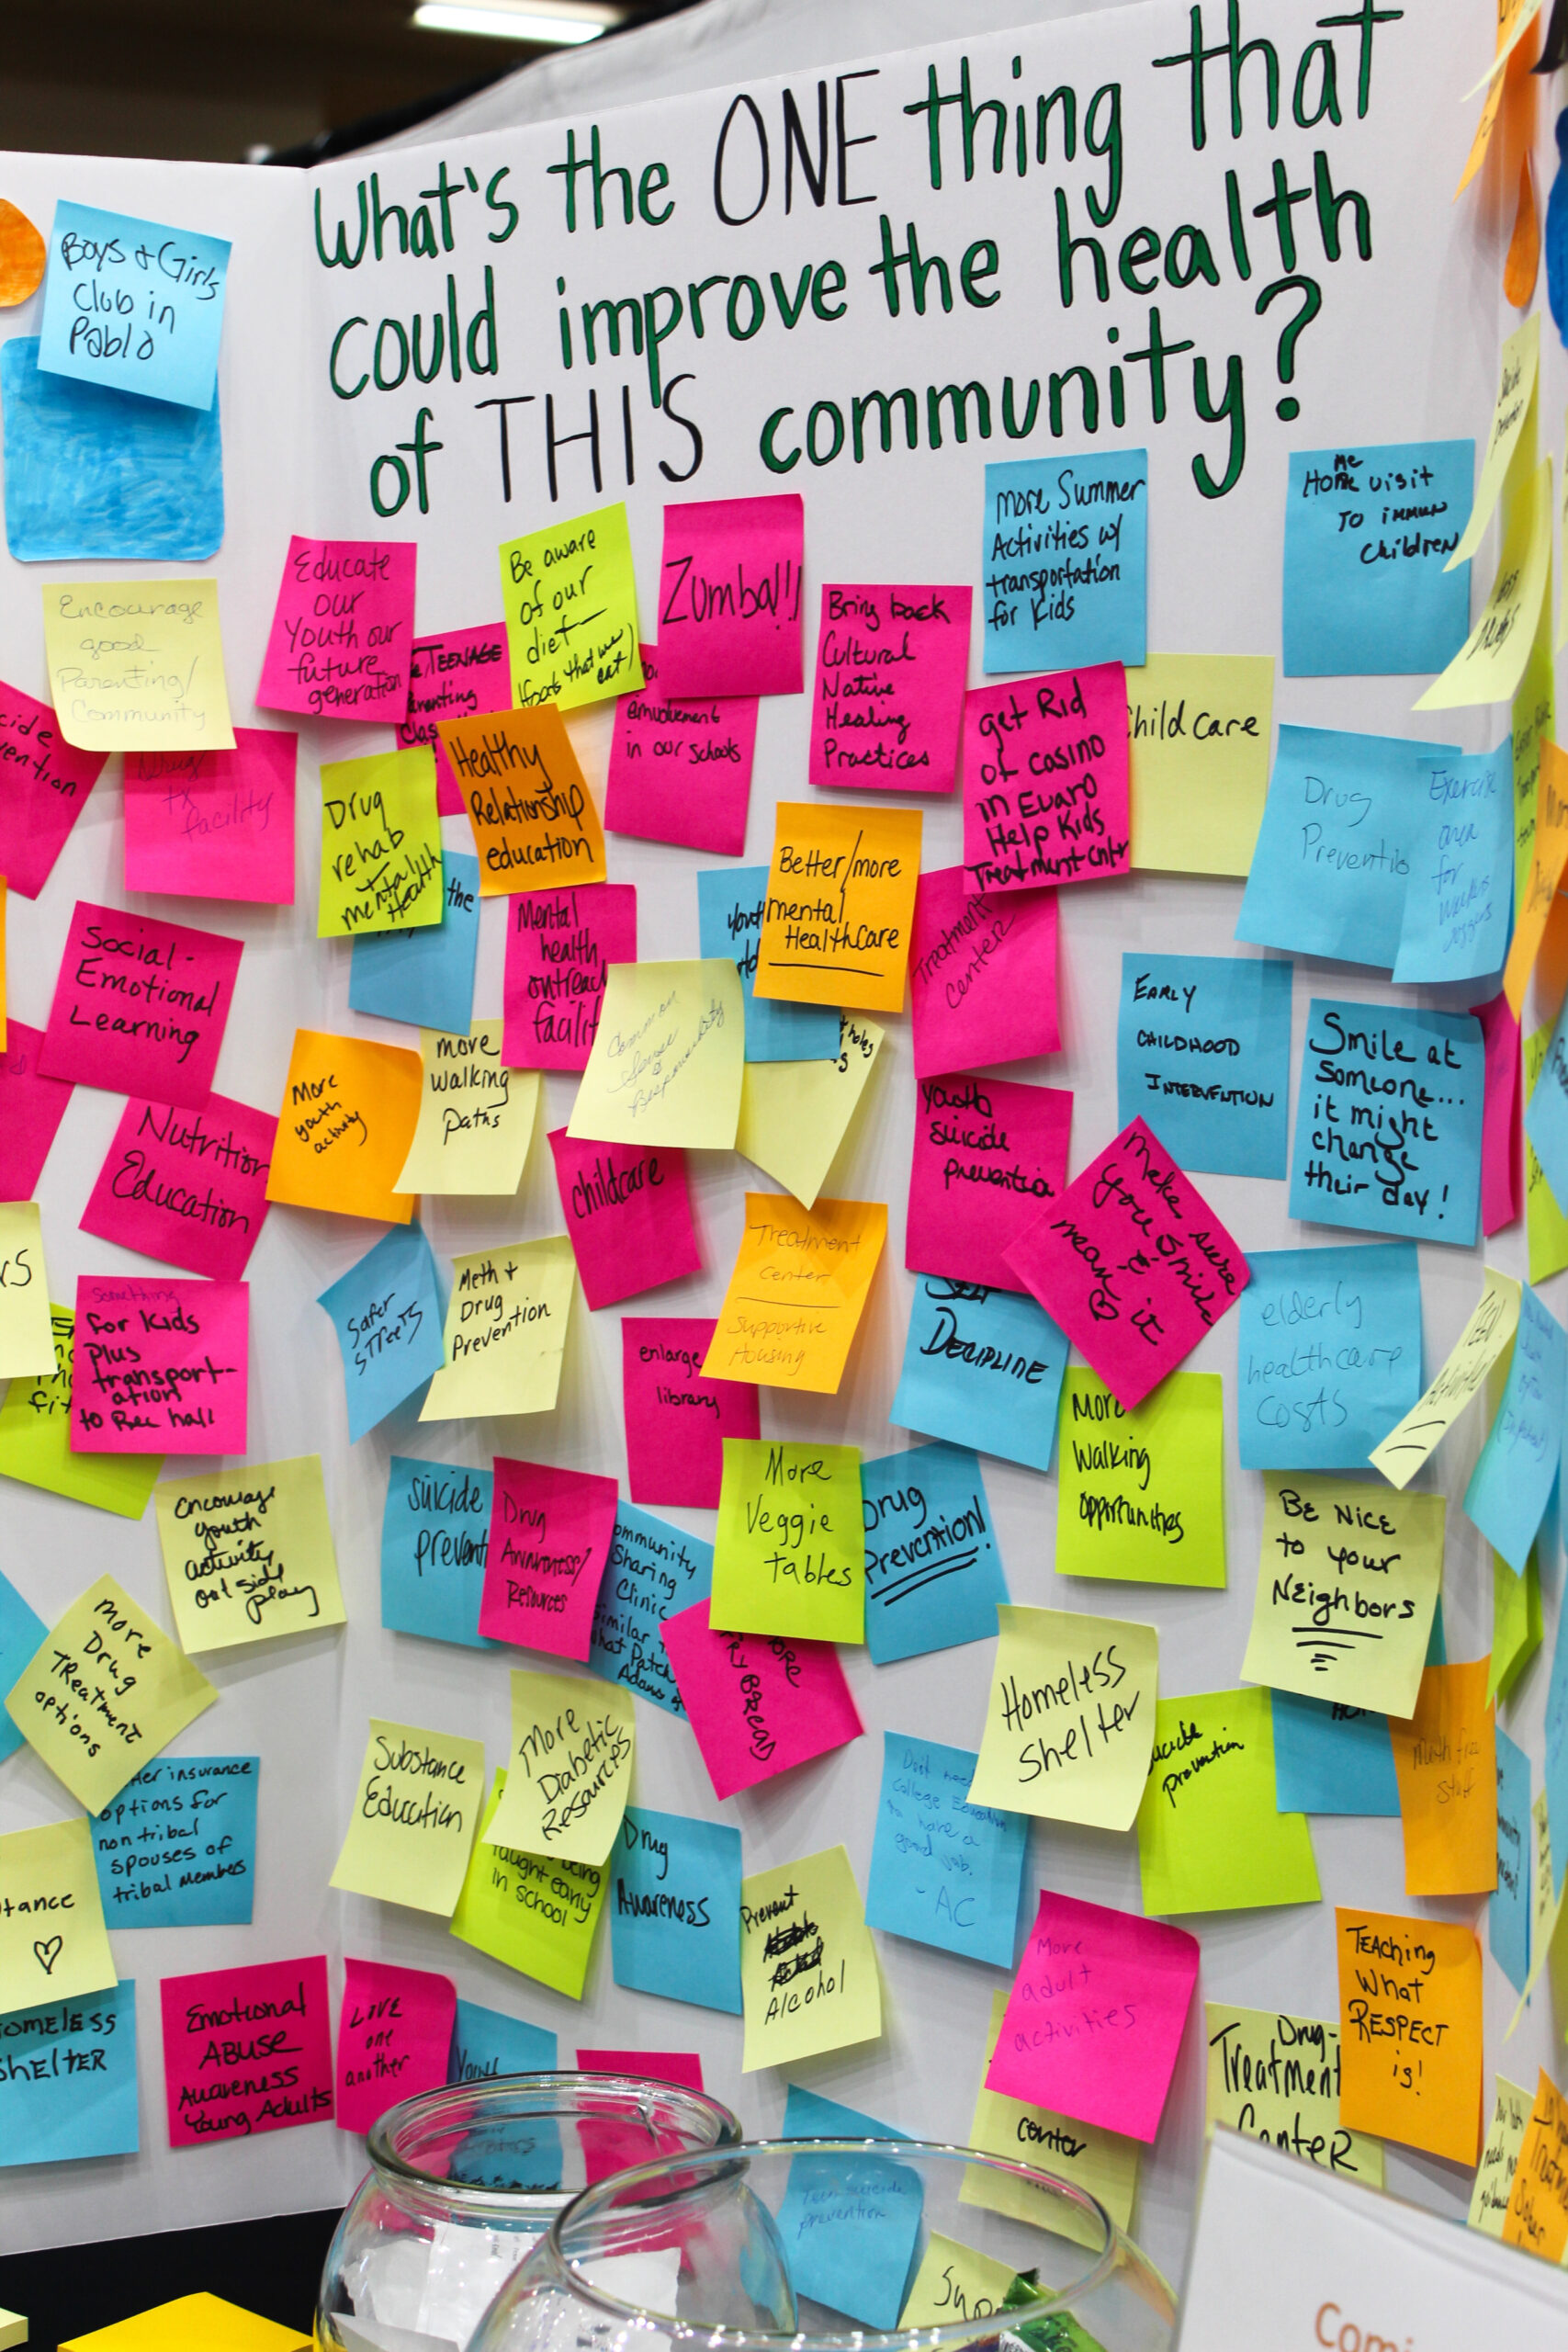 Post-it notes and comments filling a wall